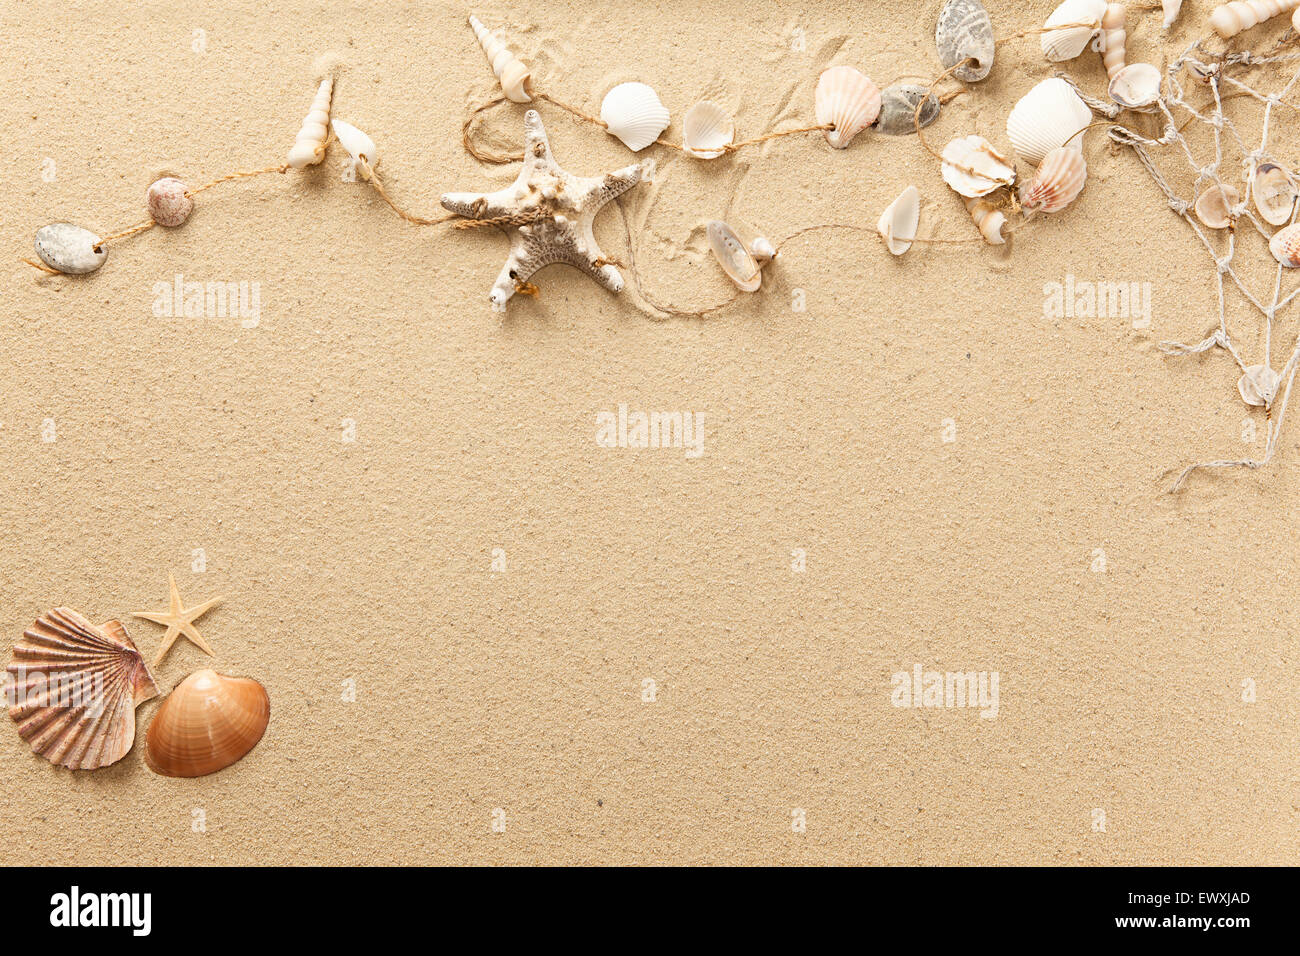 Seashells and net on the beach with room for text Stock Photo